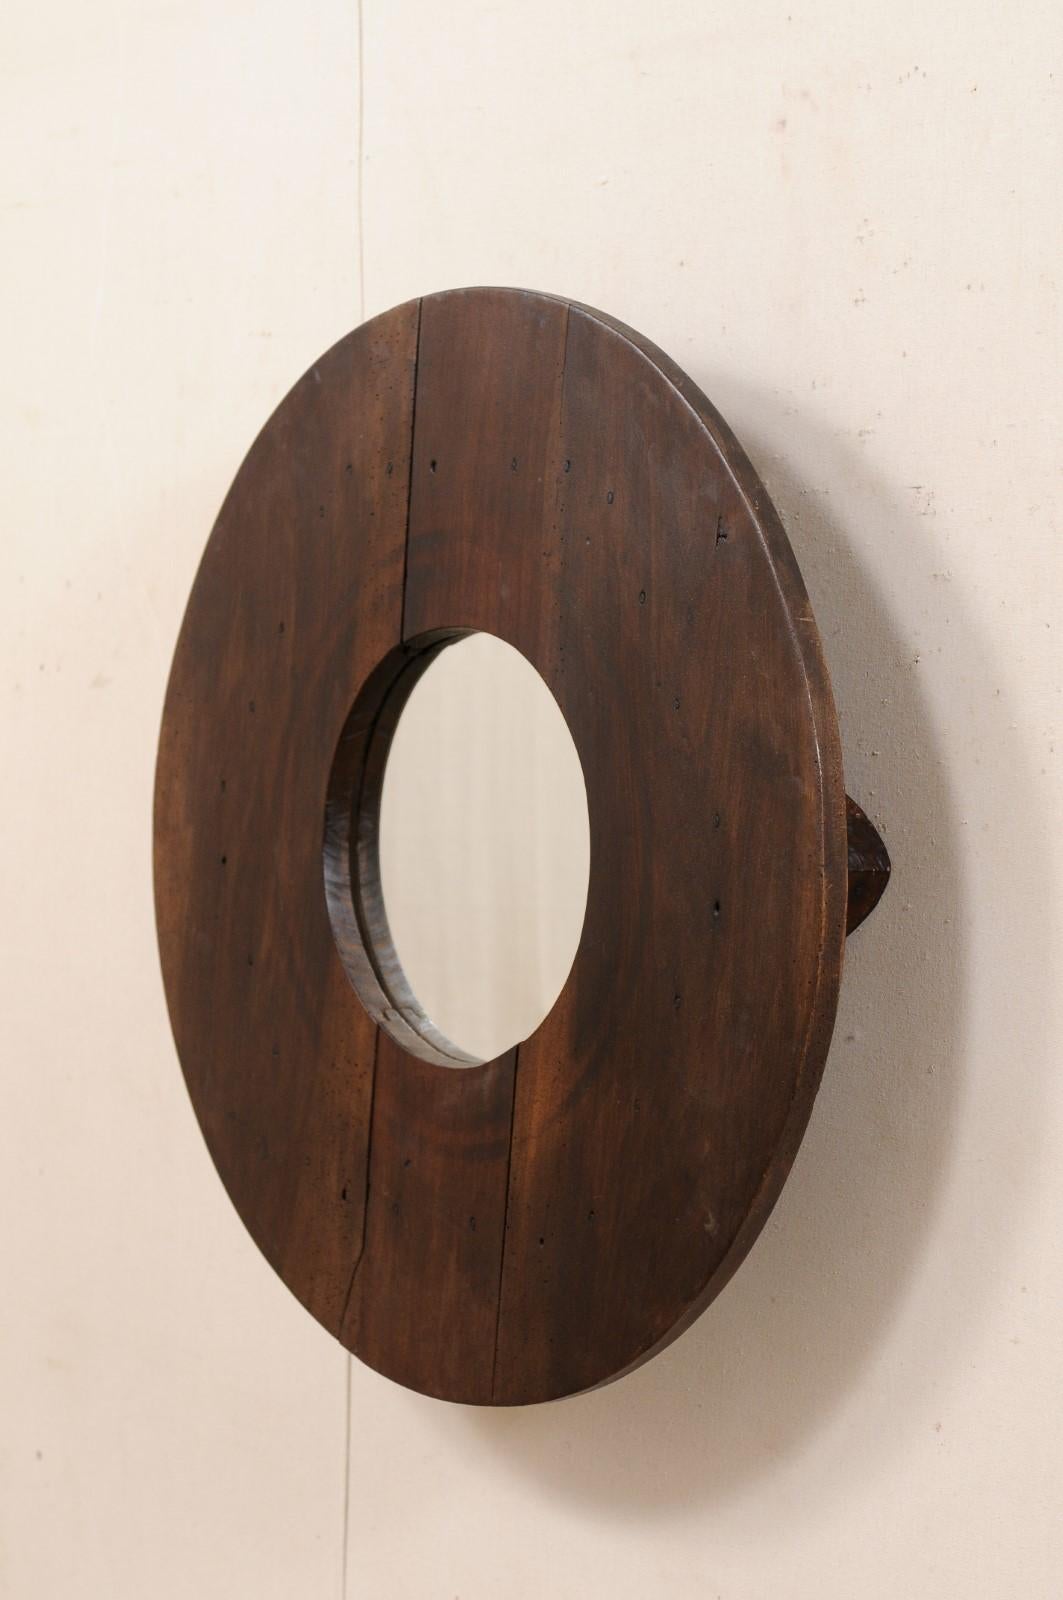 African Unique Circular Shaped Mirror with Great Side Profile with Projection from Wall For Sale